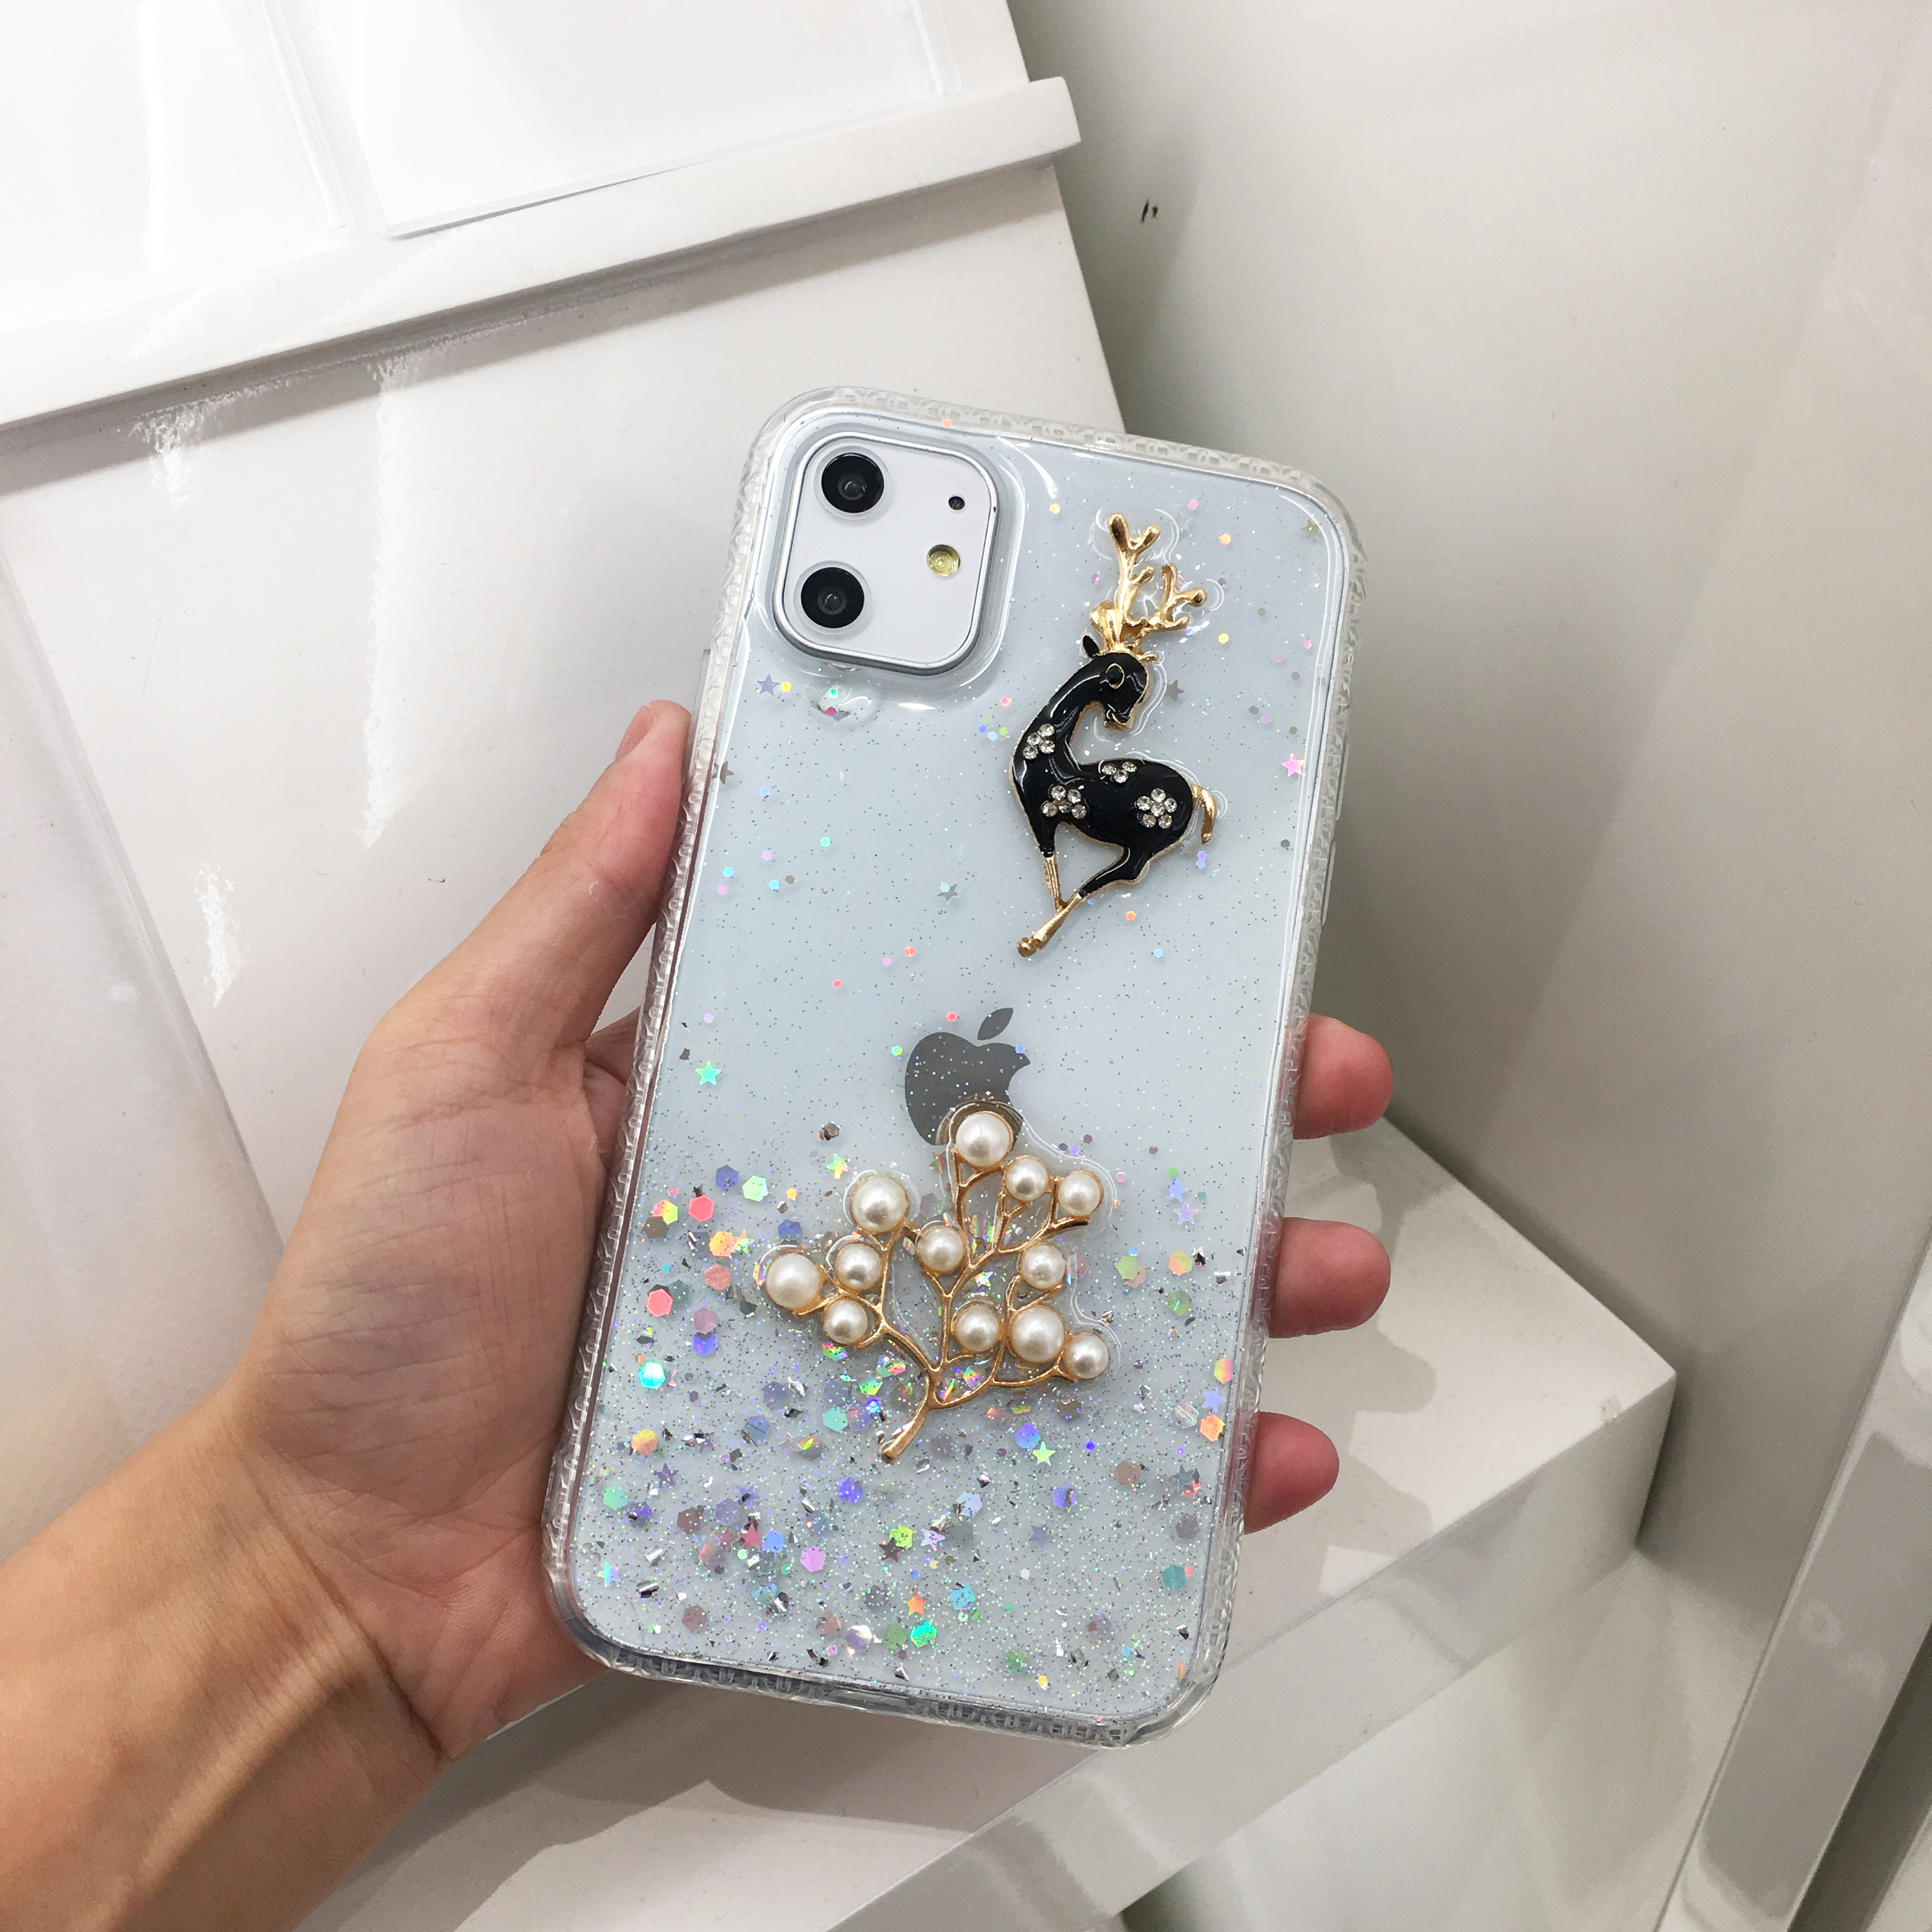 iPHONE 11 Pro (5.8in) 3D Deer Crystal Diamond Shiny Case (Clear)